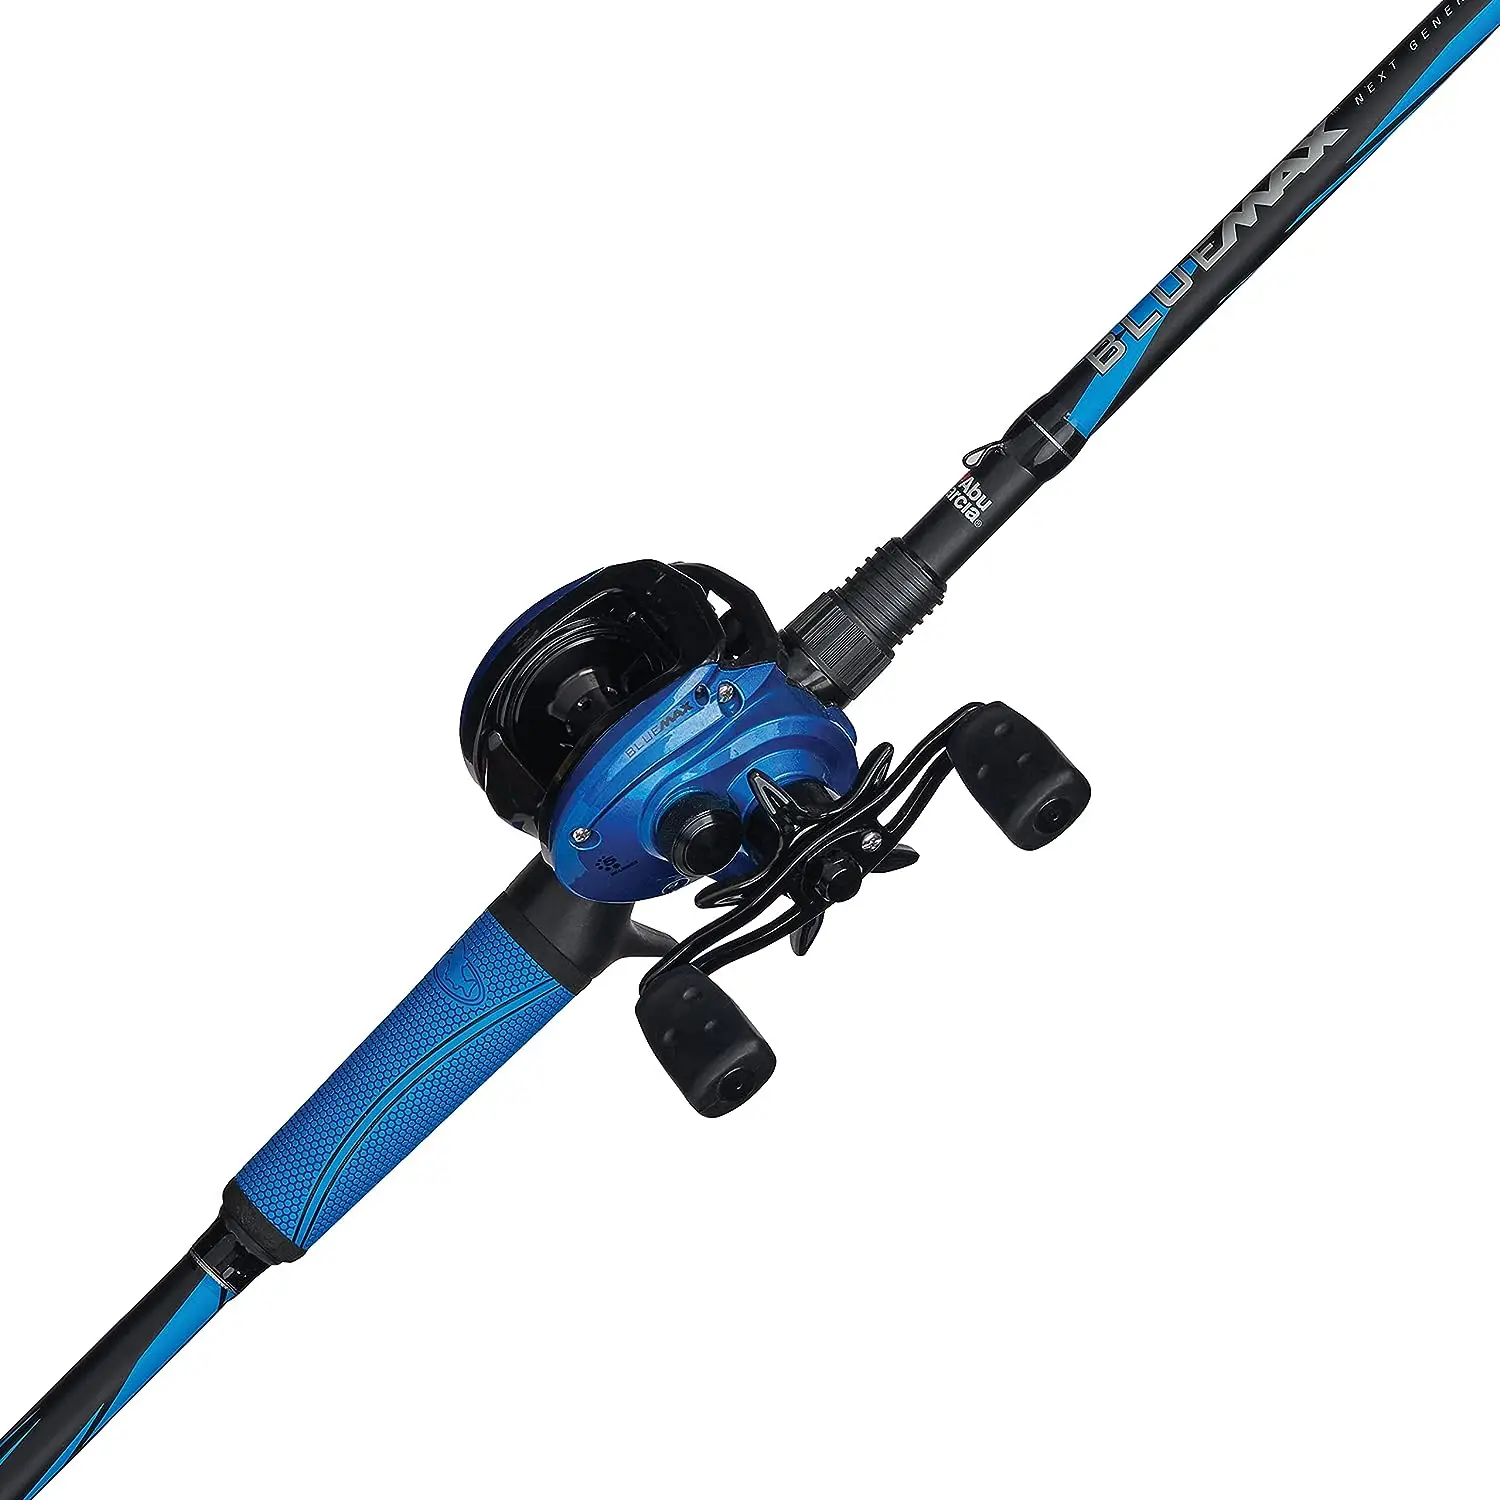 

Blue Max Low Profile Baitcast Reel and Fishing Rod Combo, 7'